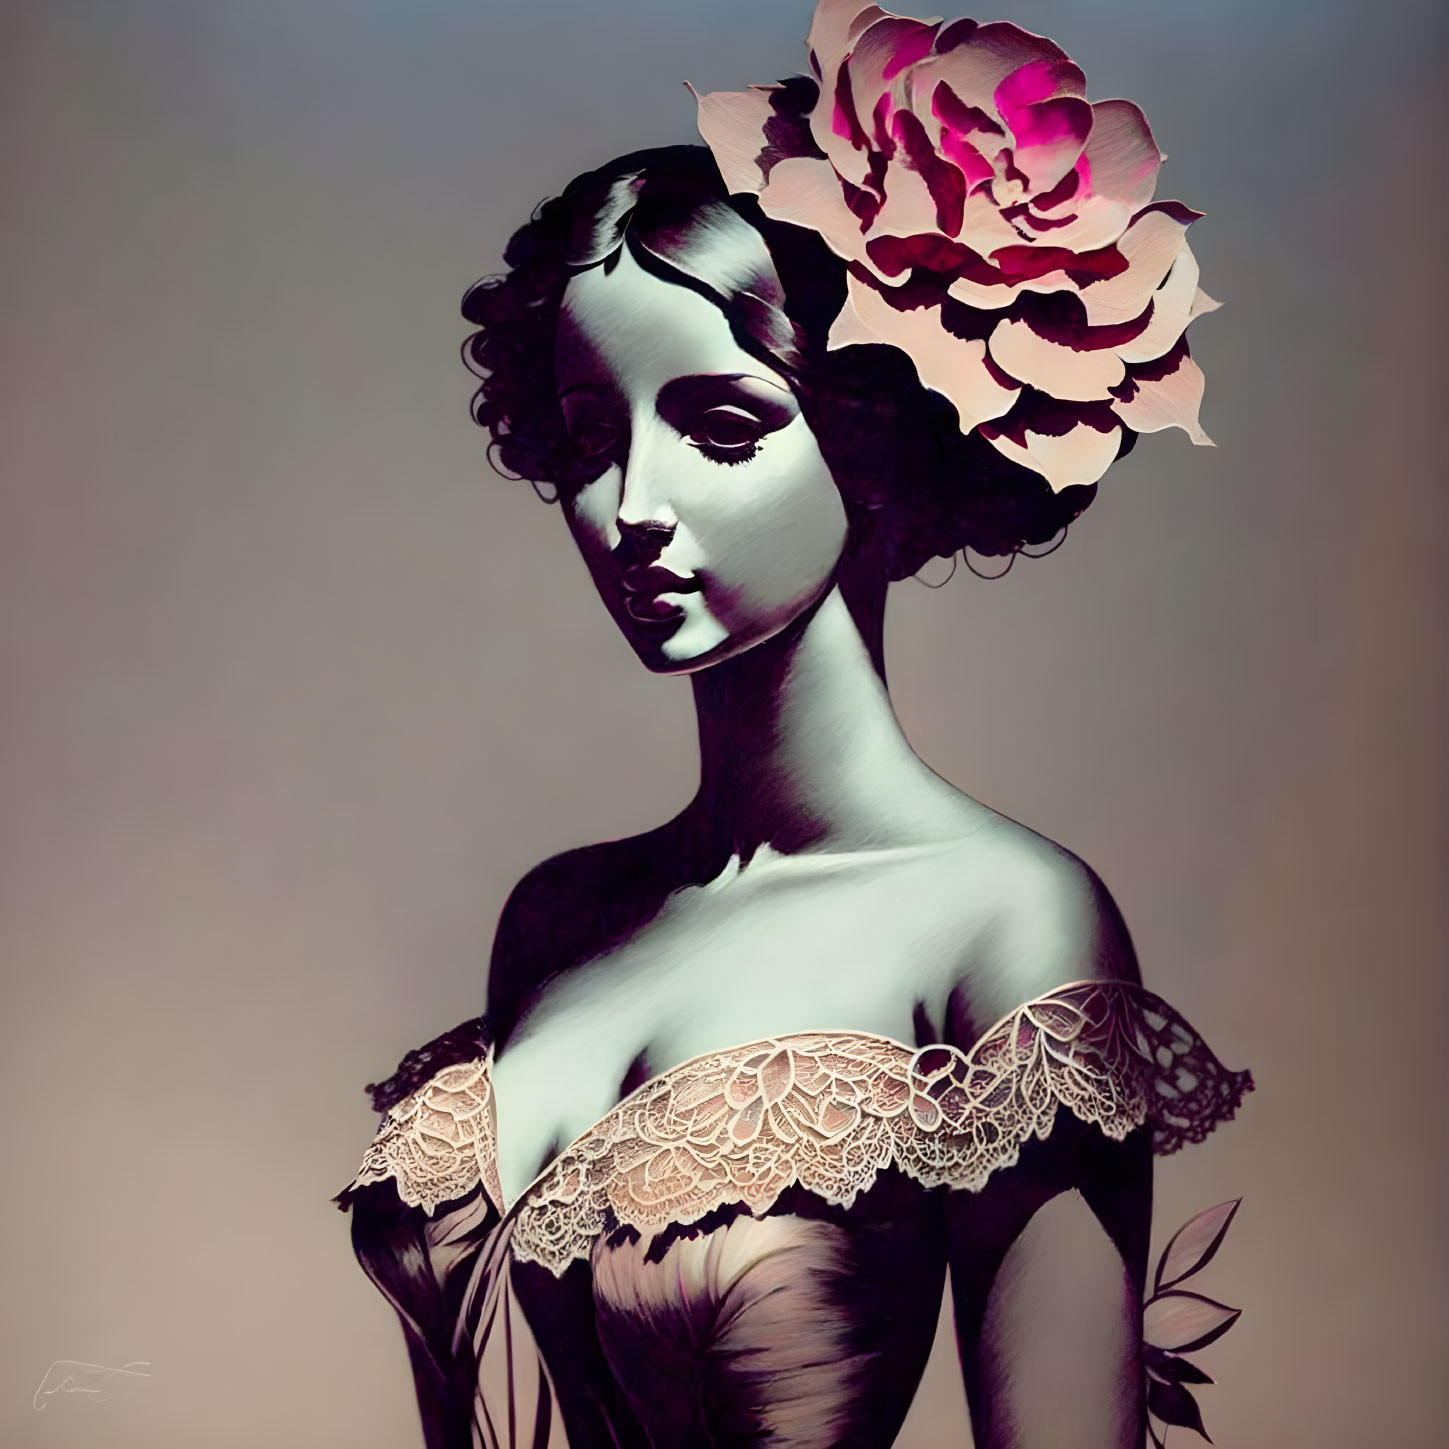 Stylized portrait of woman with blooming flower hair & vintage lace details